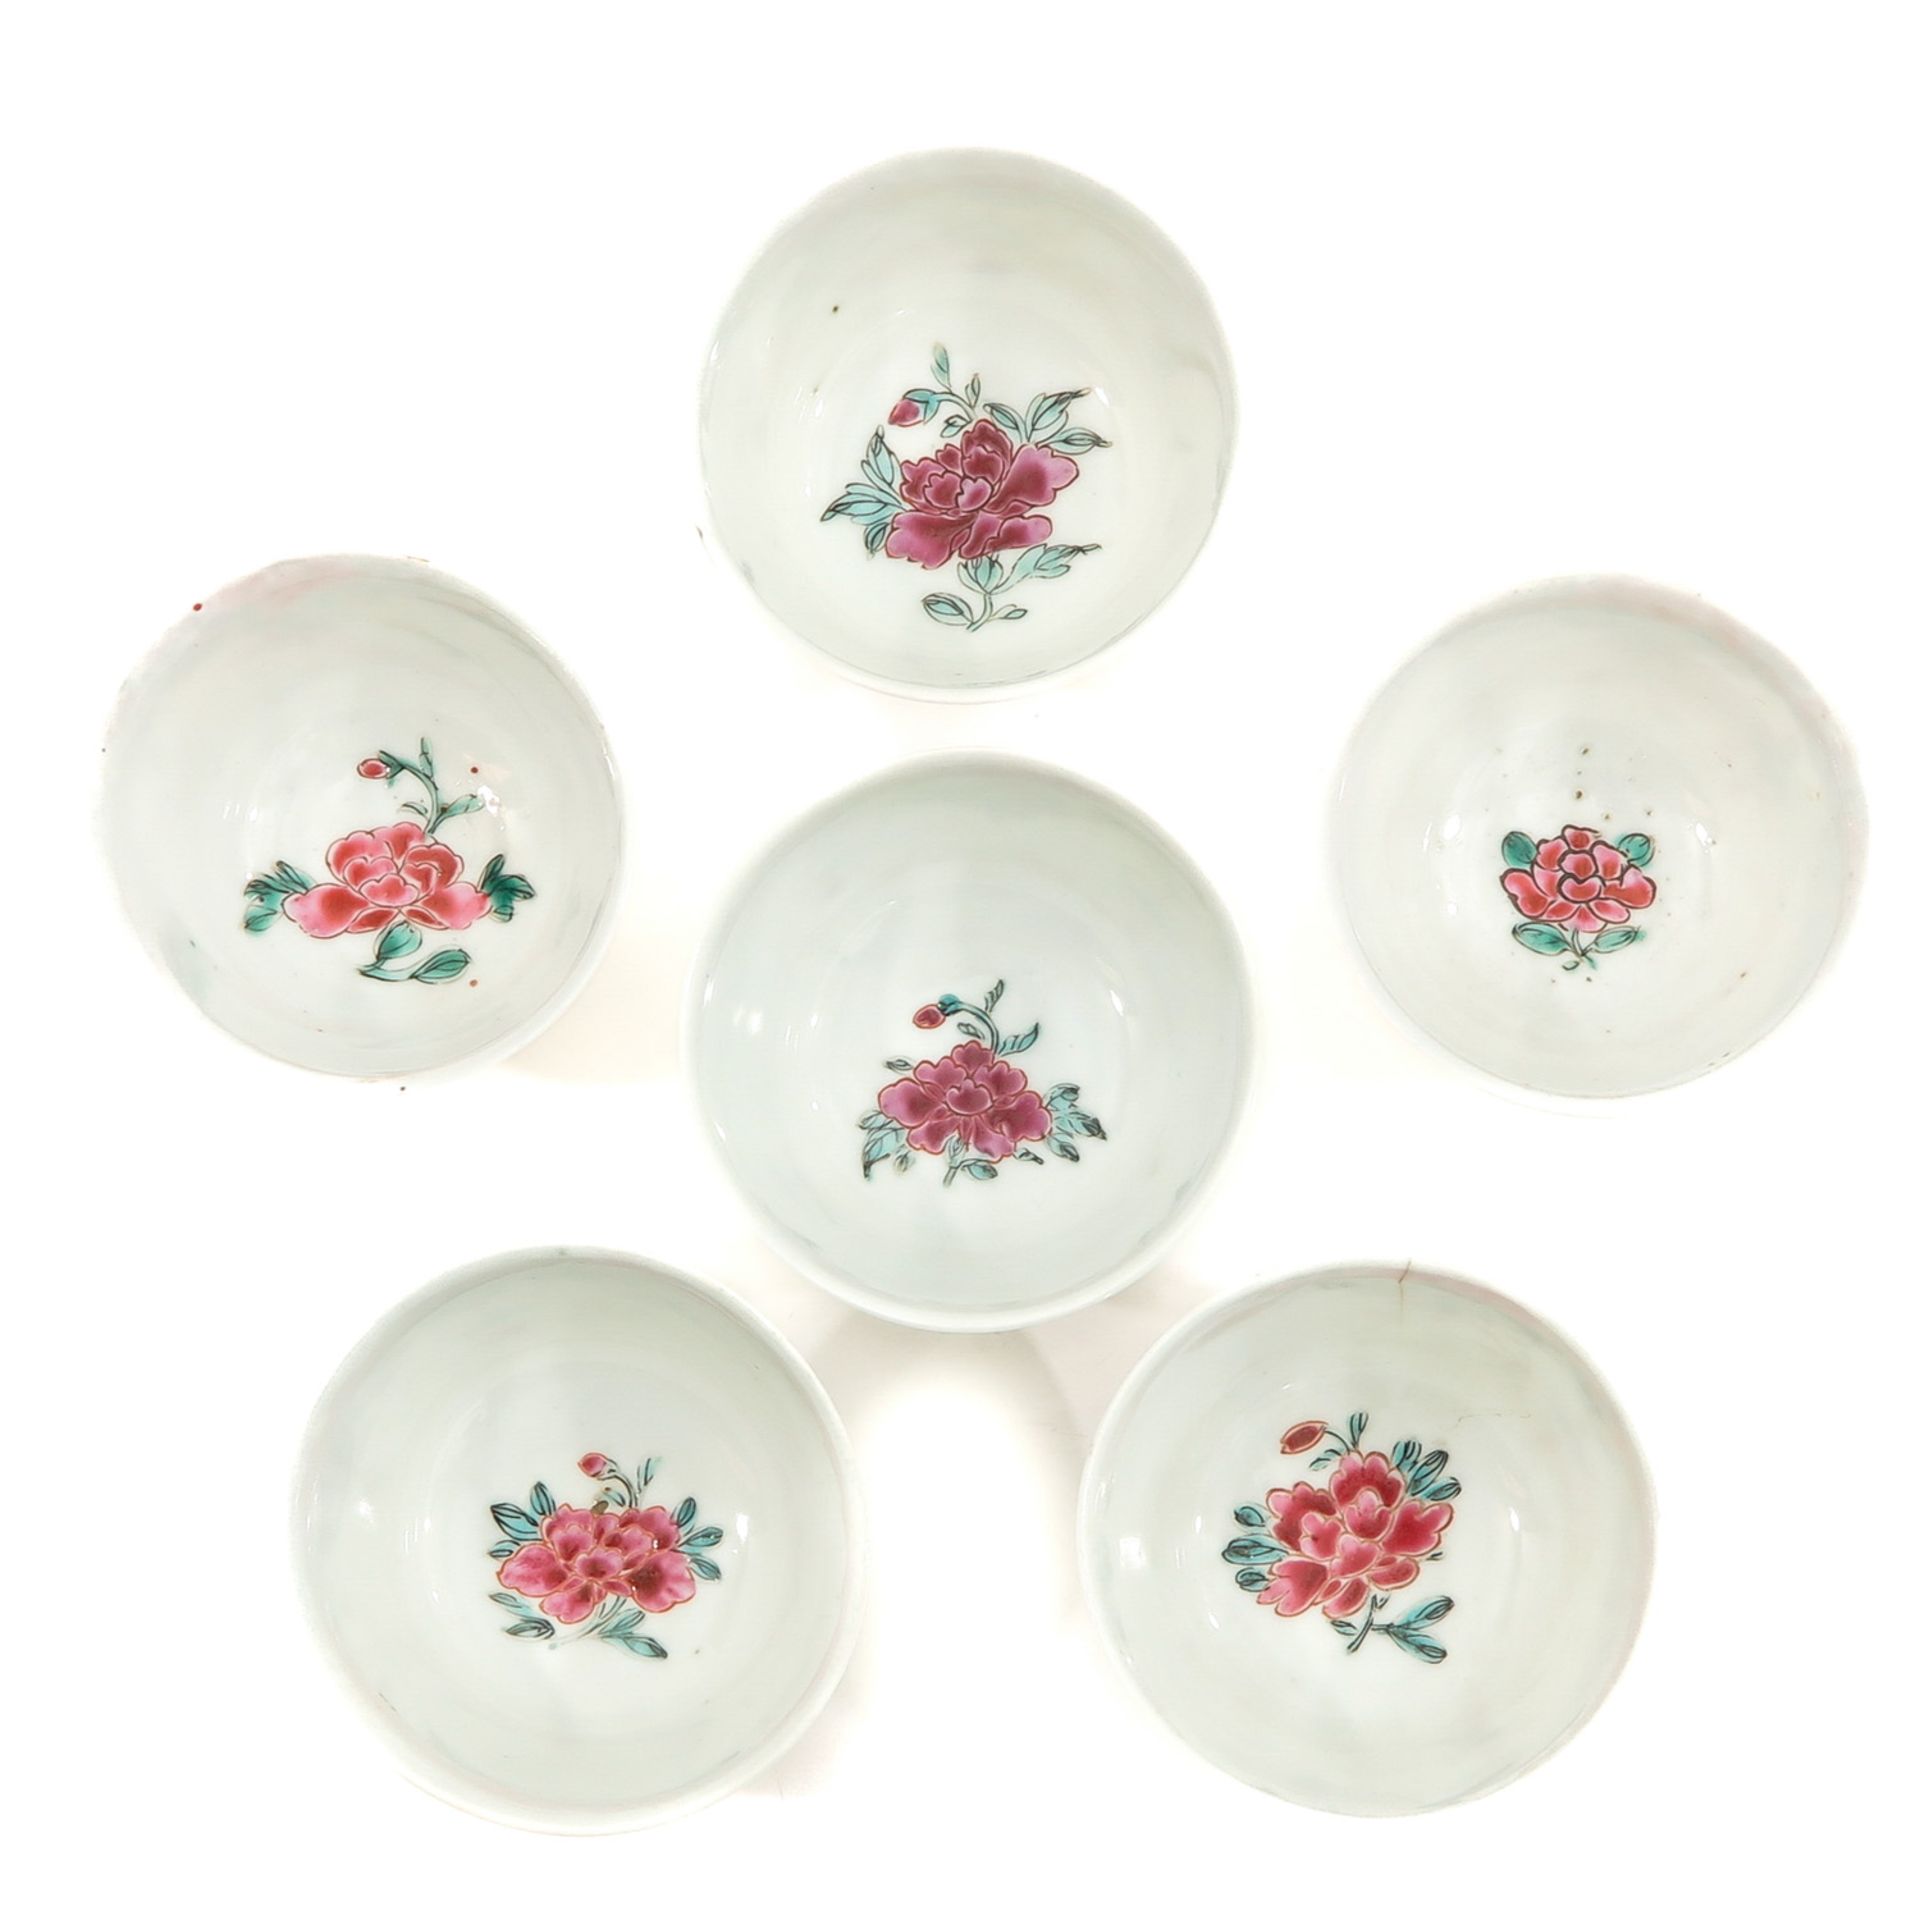 A Series of 6 Famille Rose Cups and Saucers - Image 5 of 10